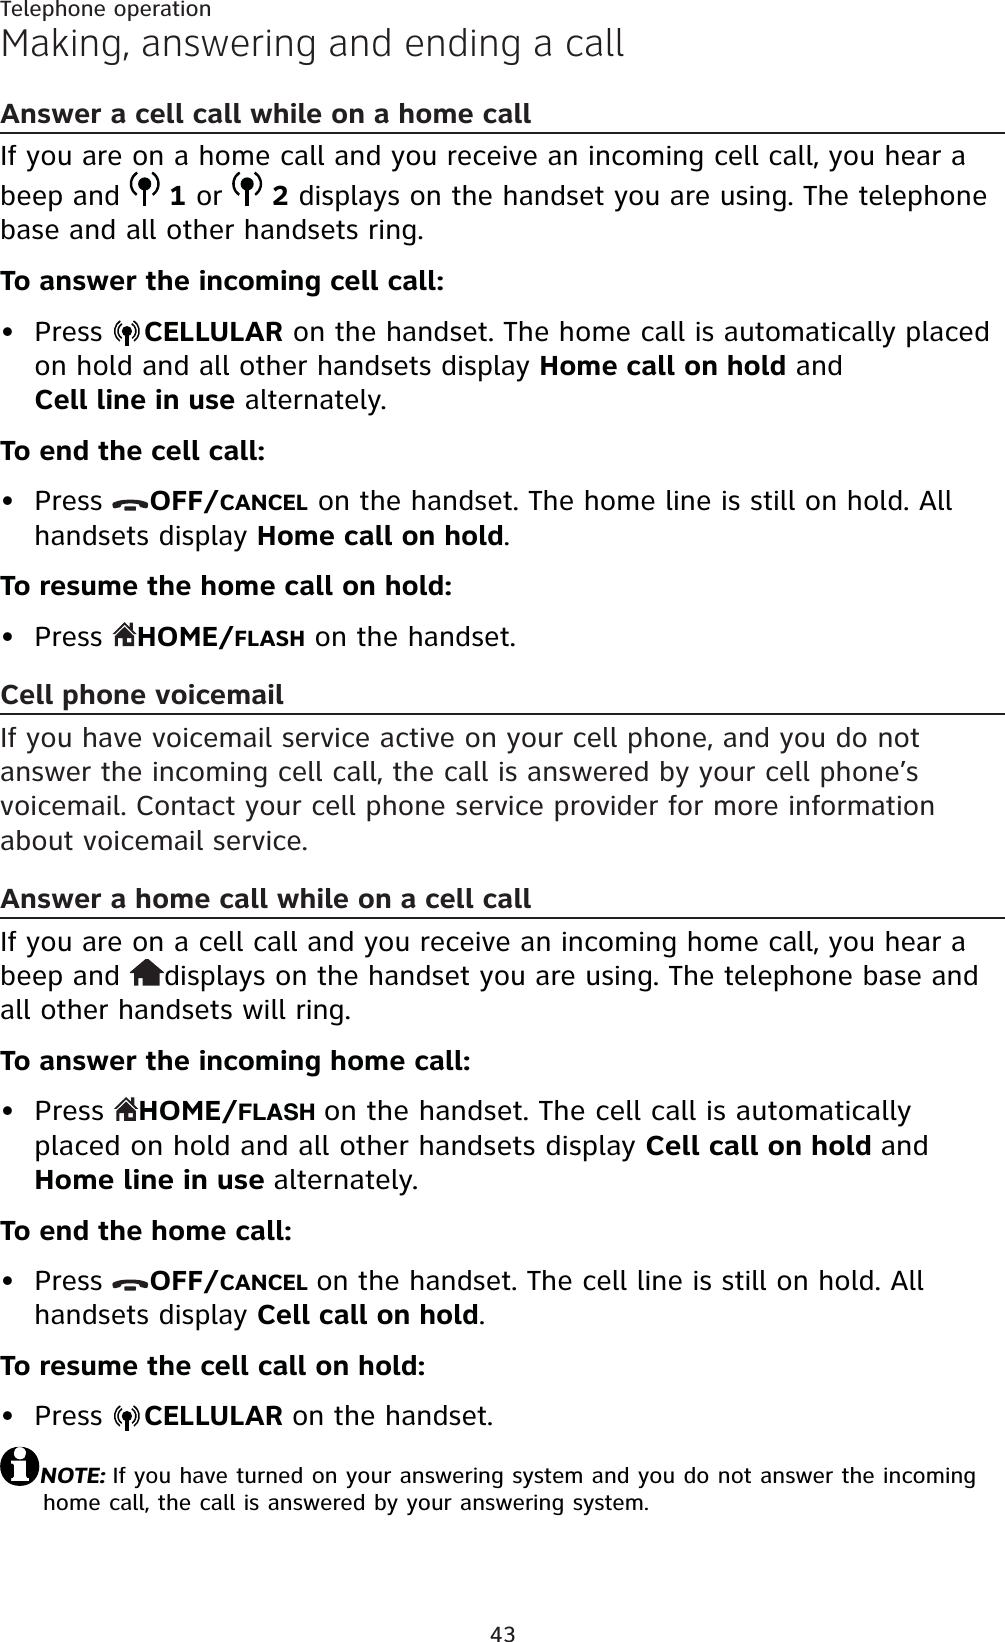 43Telephone operationMaking, answering and ending a callAnswer a cell call while on a home callIf you are on a home call and you receive an incoming cell call, you hear a beep and  1 or  2 displays on the handset you are using. The telephone base and all other handsets ring.To answer the incoming cell call:Press  CELLULAR on the handset. The home call is automatically placed on hold and all other handsets display Home call on hold and Cell line in use alternately.To end the cell call:Press  OFF/CANCEL on the handset. The home line is still on hold. All handsets display Home call on hold.To resume the home call on hold:Press  HOME/FLASH on the handset.Cell phone voicemailIf you have voicemail service active on your cell phone, and you do not answer the incoming cell call, the call is answered by your cell phone’s voicemail. Contact your cell phone service provider for more information about voicemail service.Answer a home call while on a cell callIf you are on a cell call and you receive an incoming home call, you hear a beep and  displays on the handset you are using. The telephone base and all other handsets will ring.To answer the incoming home call:Press  HOME/FLASH on the handset. The cell call is automatically placed on hold and all other handsets display Cell call on hold andHome line in use alternately.To end the home call:Press  OFF/CANCEL on the handset. The cell line is still on hold. All handsets display Cell call on hold.To resume the cell call on hold:Press  CELLULAR on the handset.NOTE: If you have turned on your answering system and you do not answer the incoming home call, the call is answered by your answering system.••••••